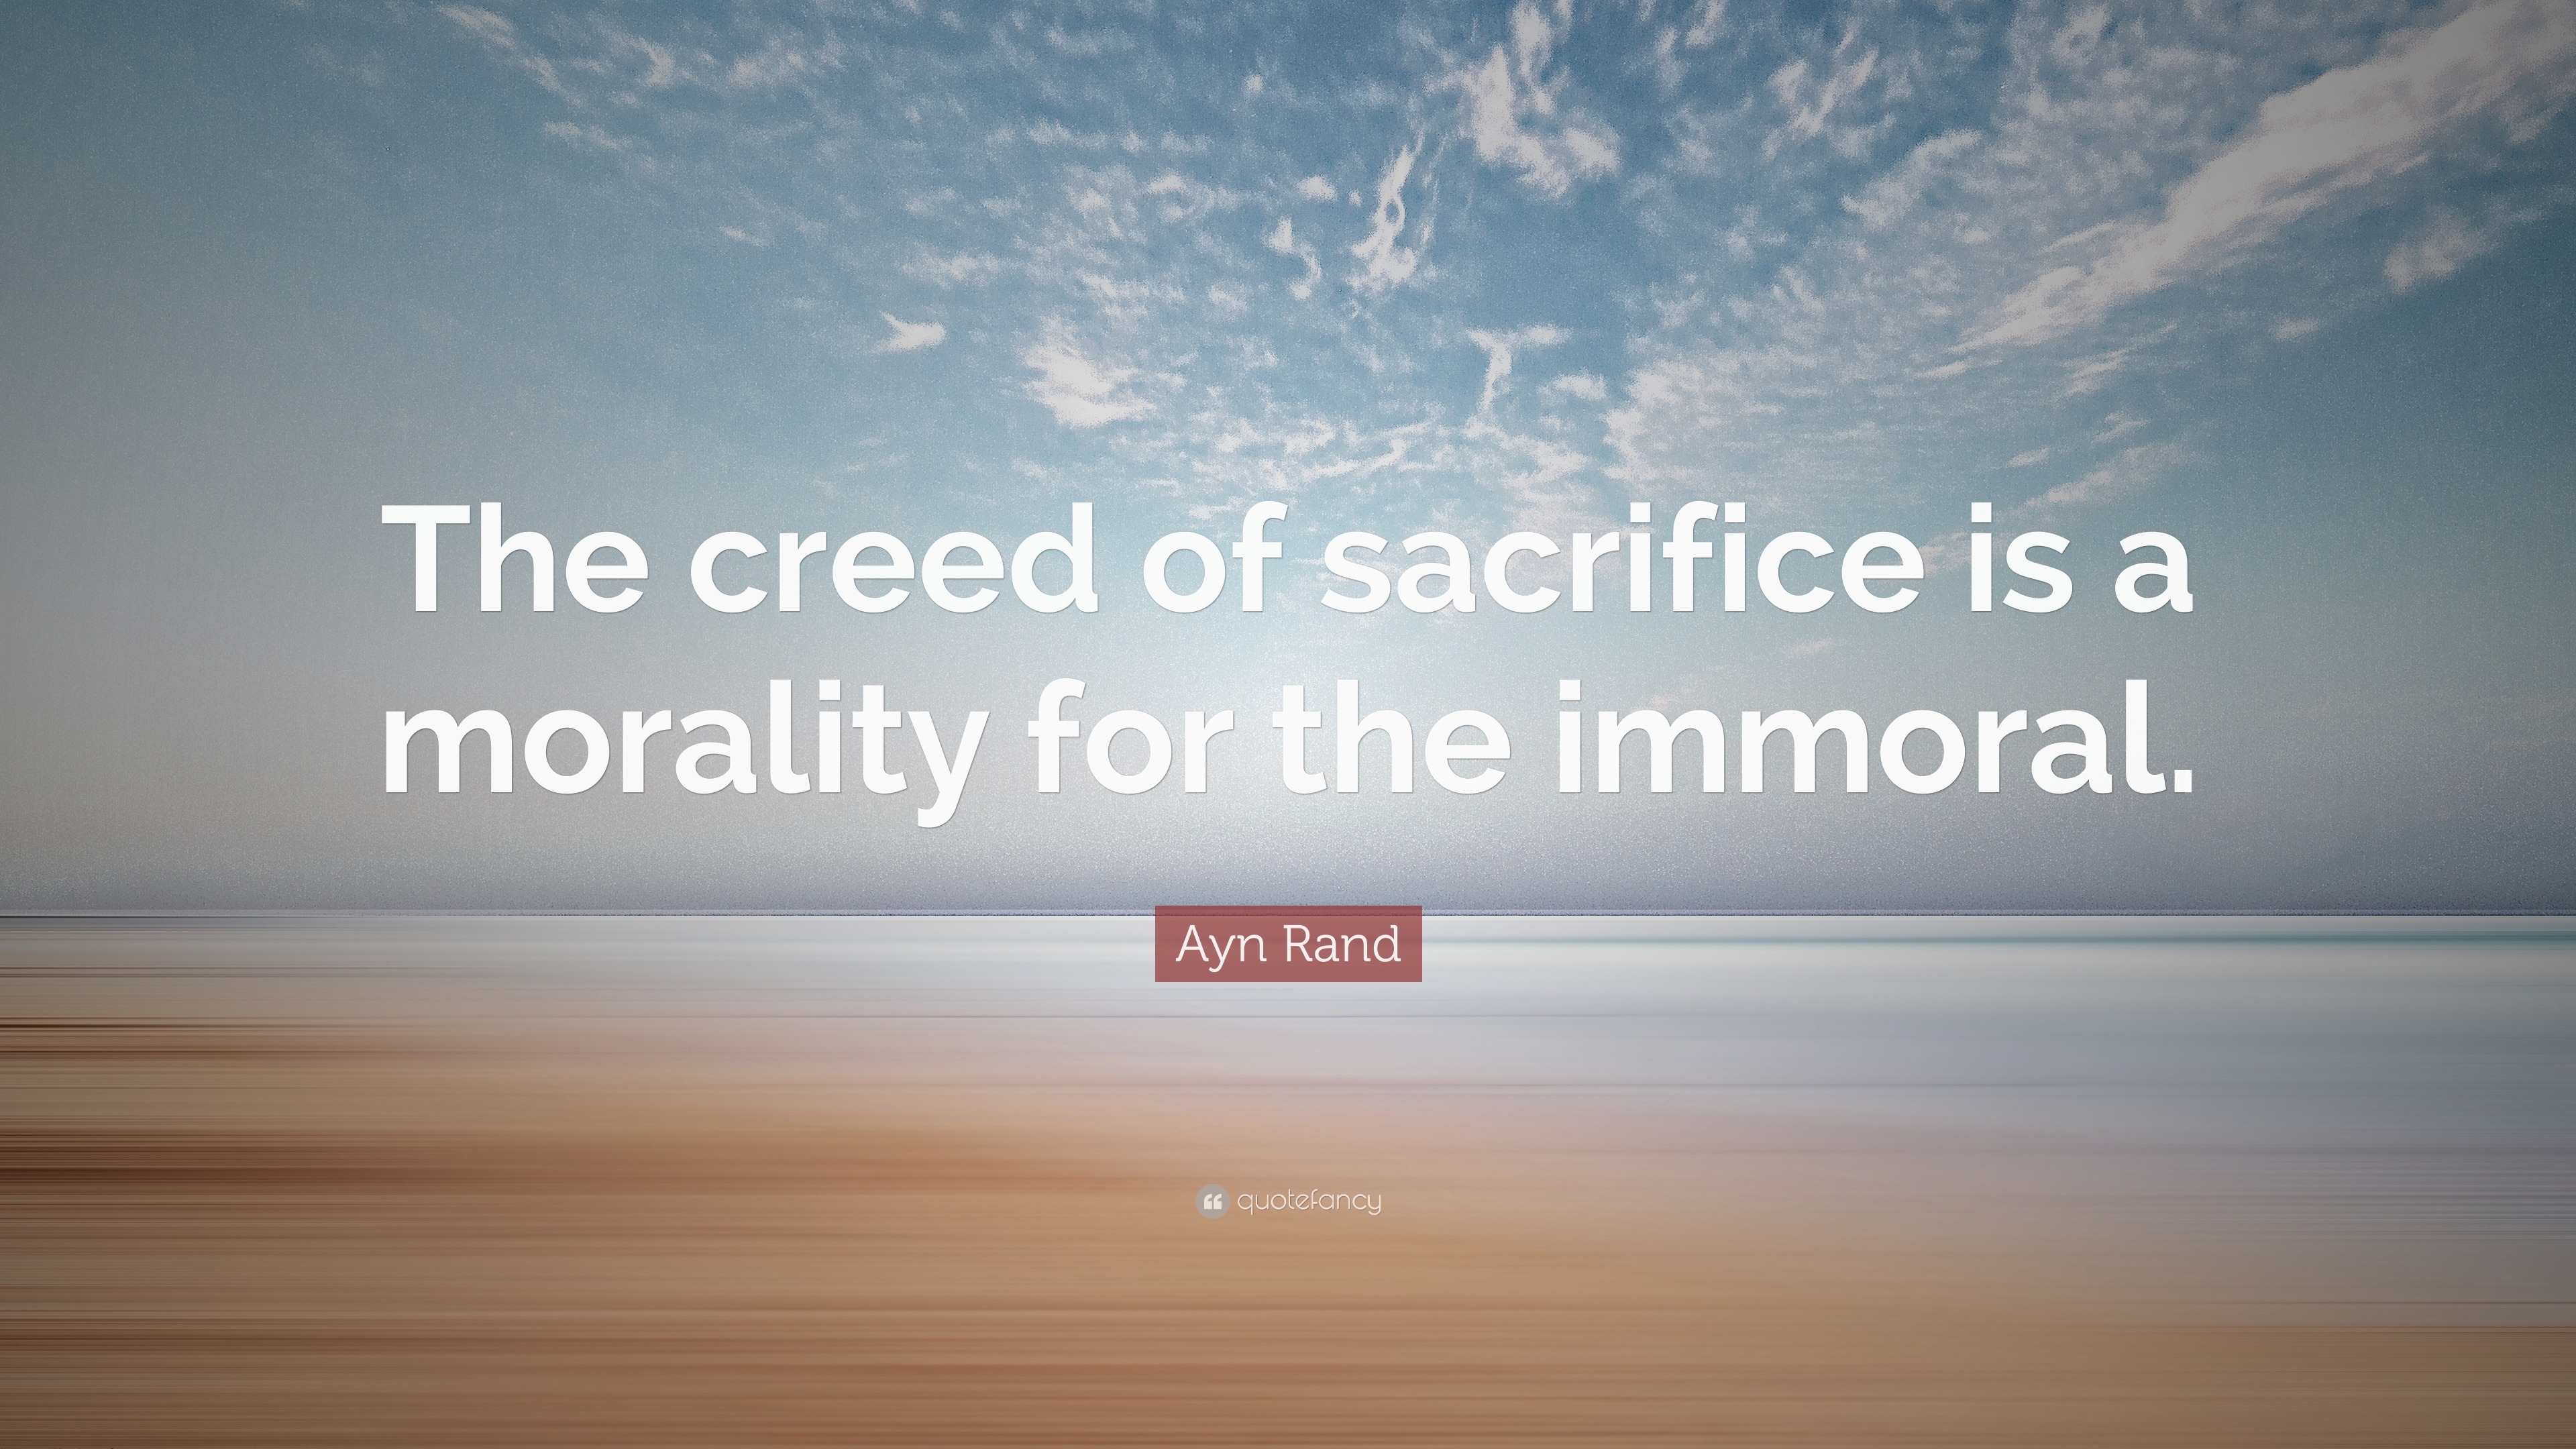 Ayn Rand Quote: “The creed of sacrifice is a morality for the